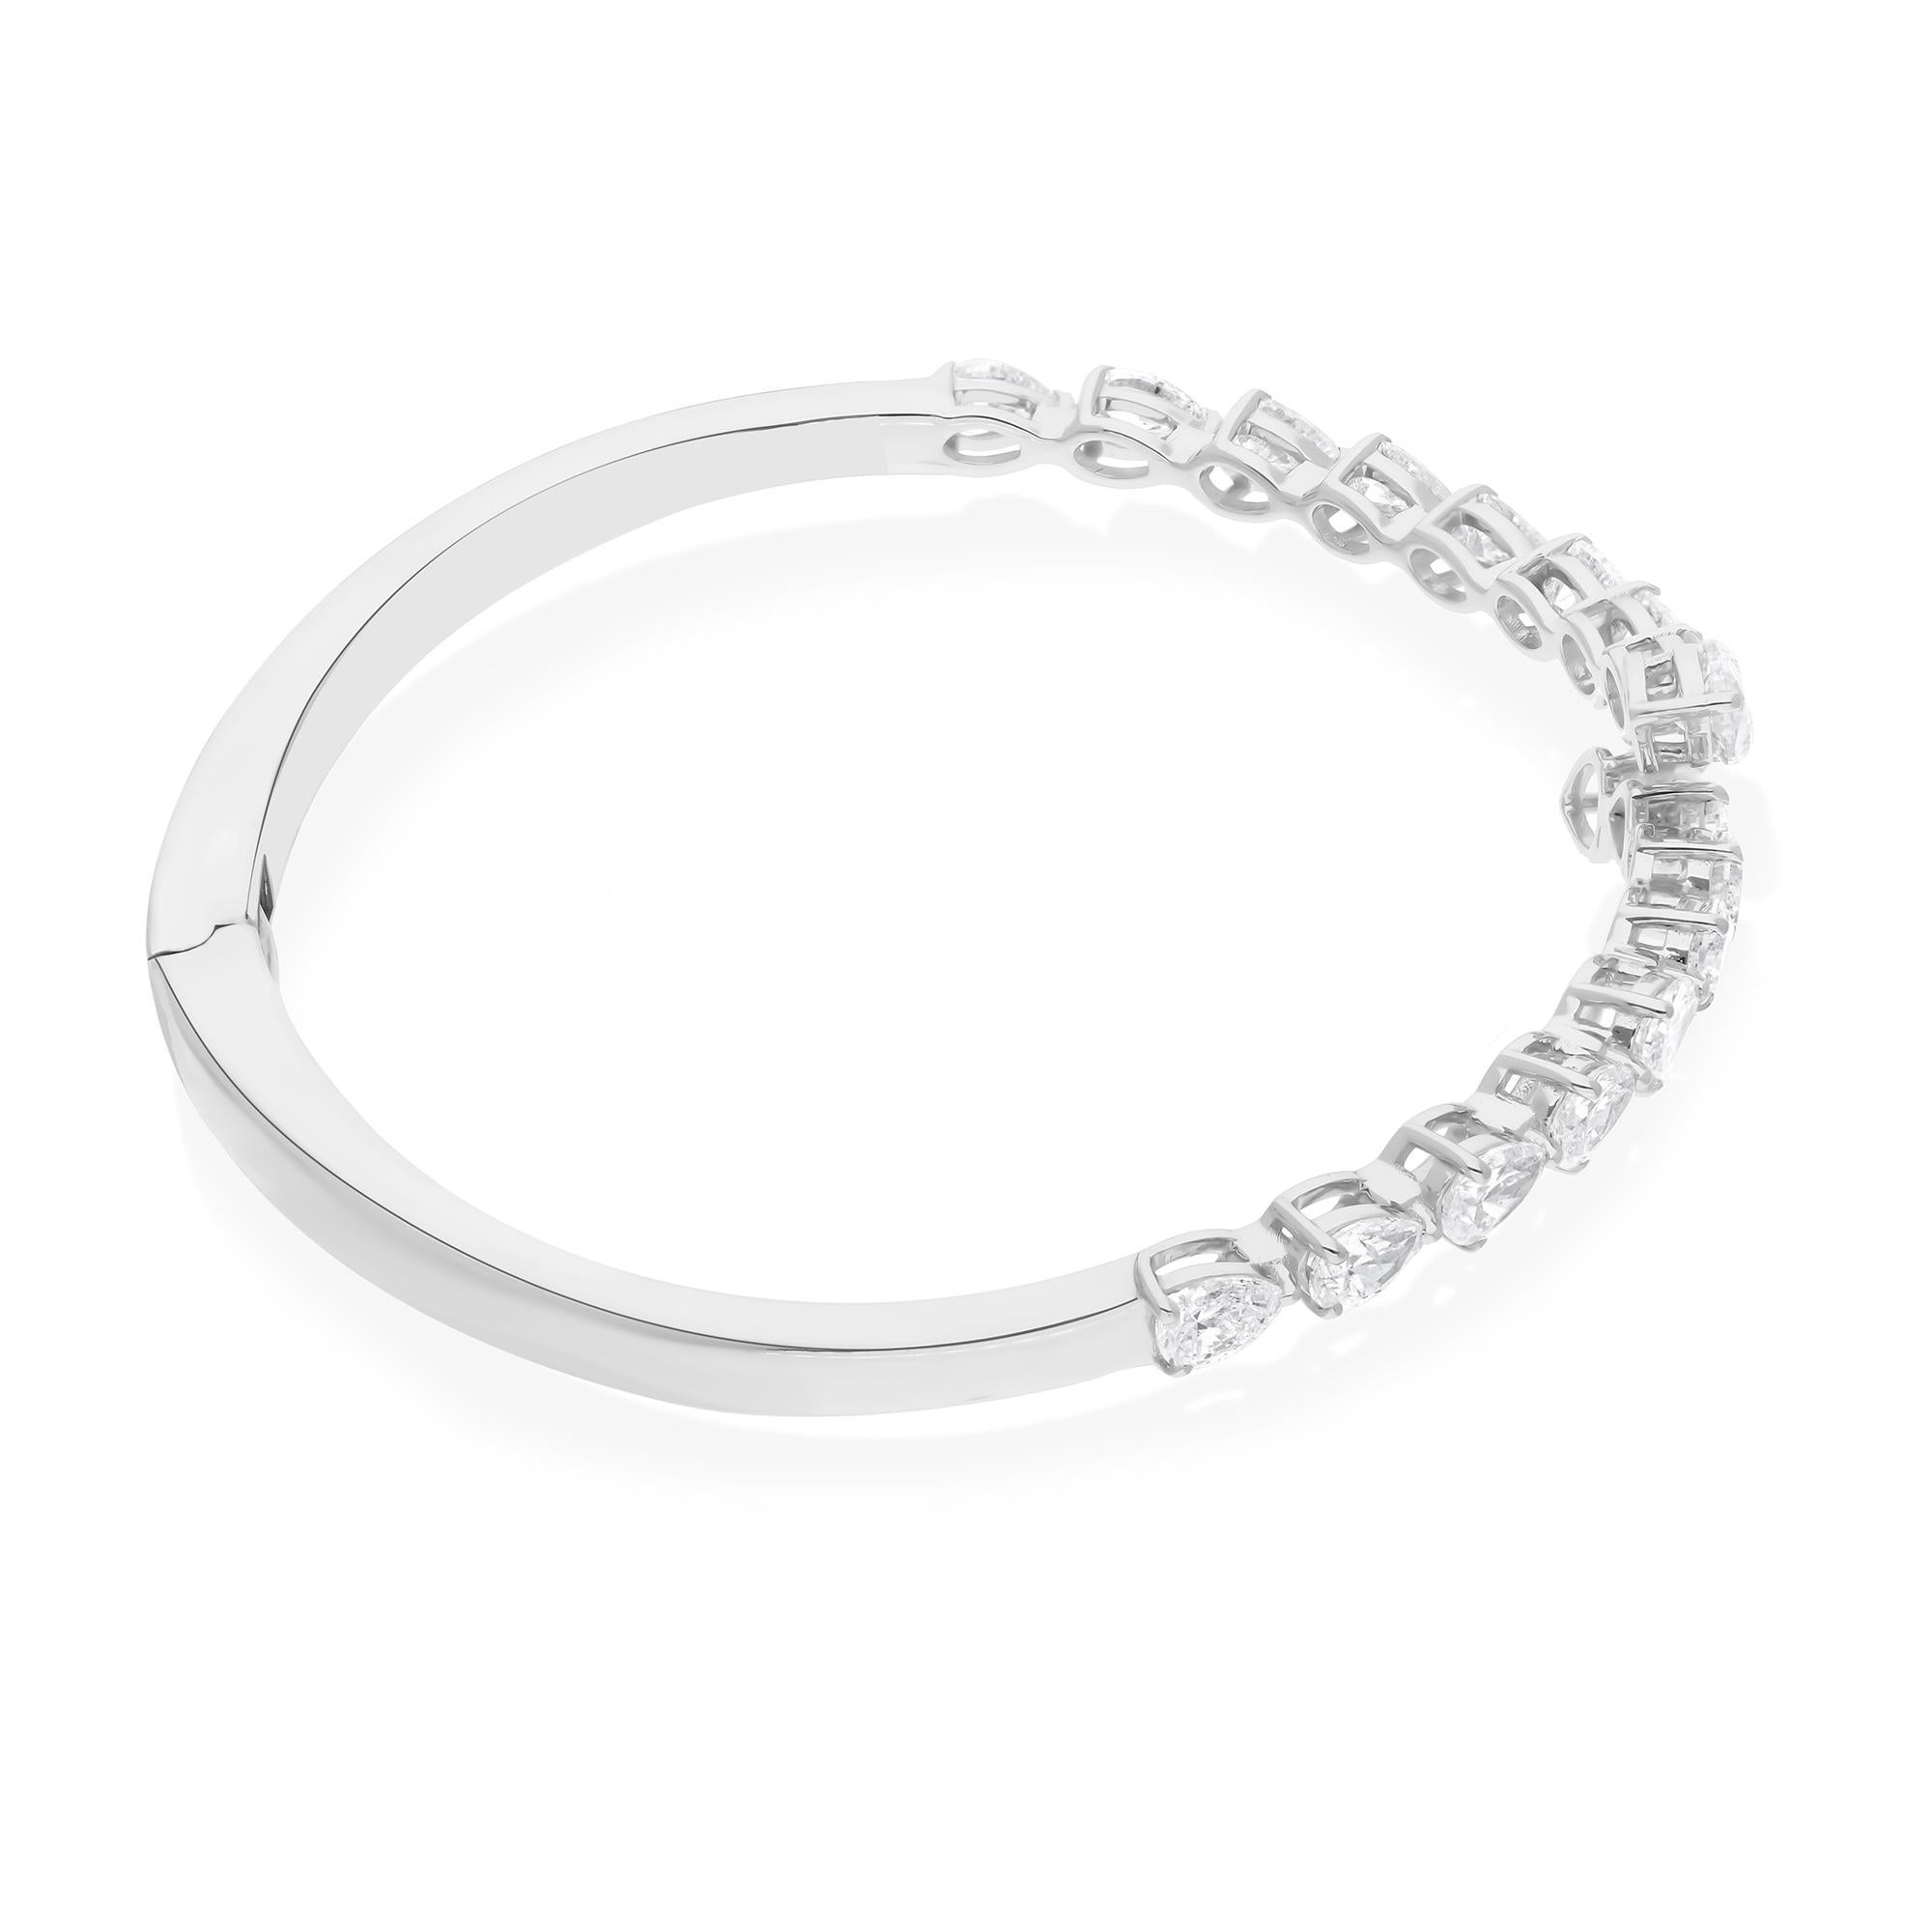 Crafted with meticulous attention to detail, this breathtaking cuff bangle bracelet features a stunning pear-shaped diamond at its focal point. Encased in lustrous 14 karat white gold, this timeless piece exudes elegance and sophistication.

Item